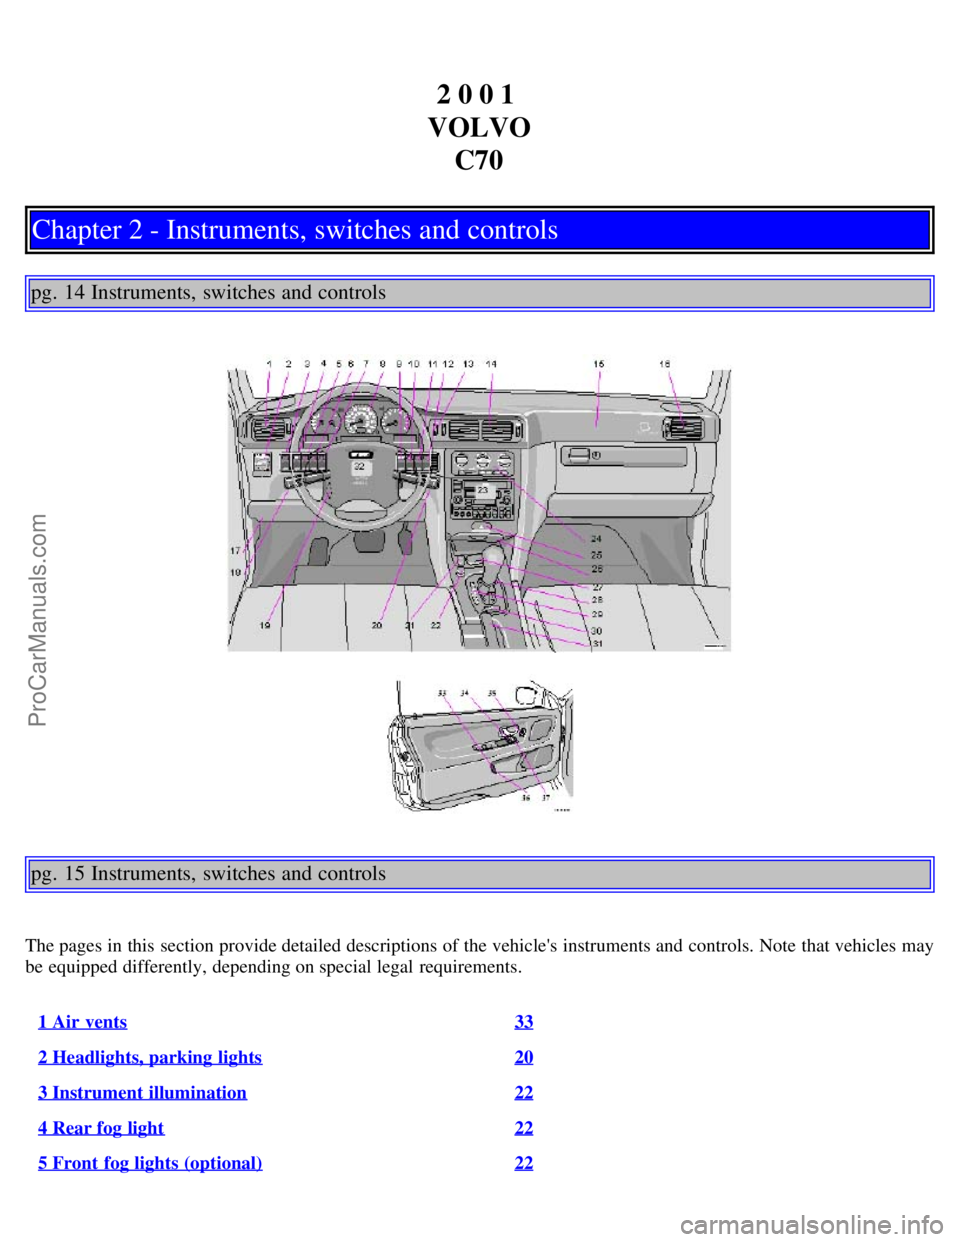 VOLVO C70 2001  Owners Manual 2 0 0 1 
VOLVO C70
Chapter 2 - Instruments, switches and controls
pg. 14 Instruments, switches and controls
pg. 15 Instruments, switches and controls
The pages in this  section provide detailed descri